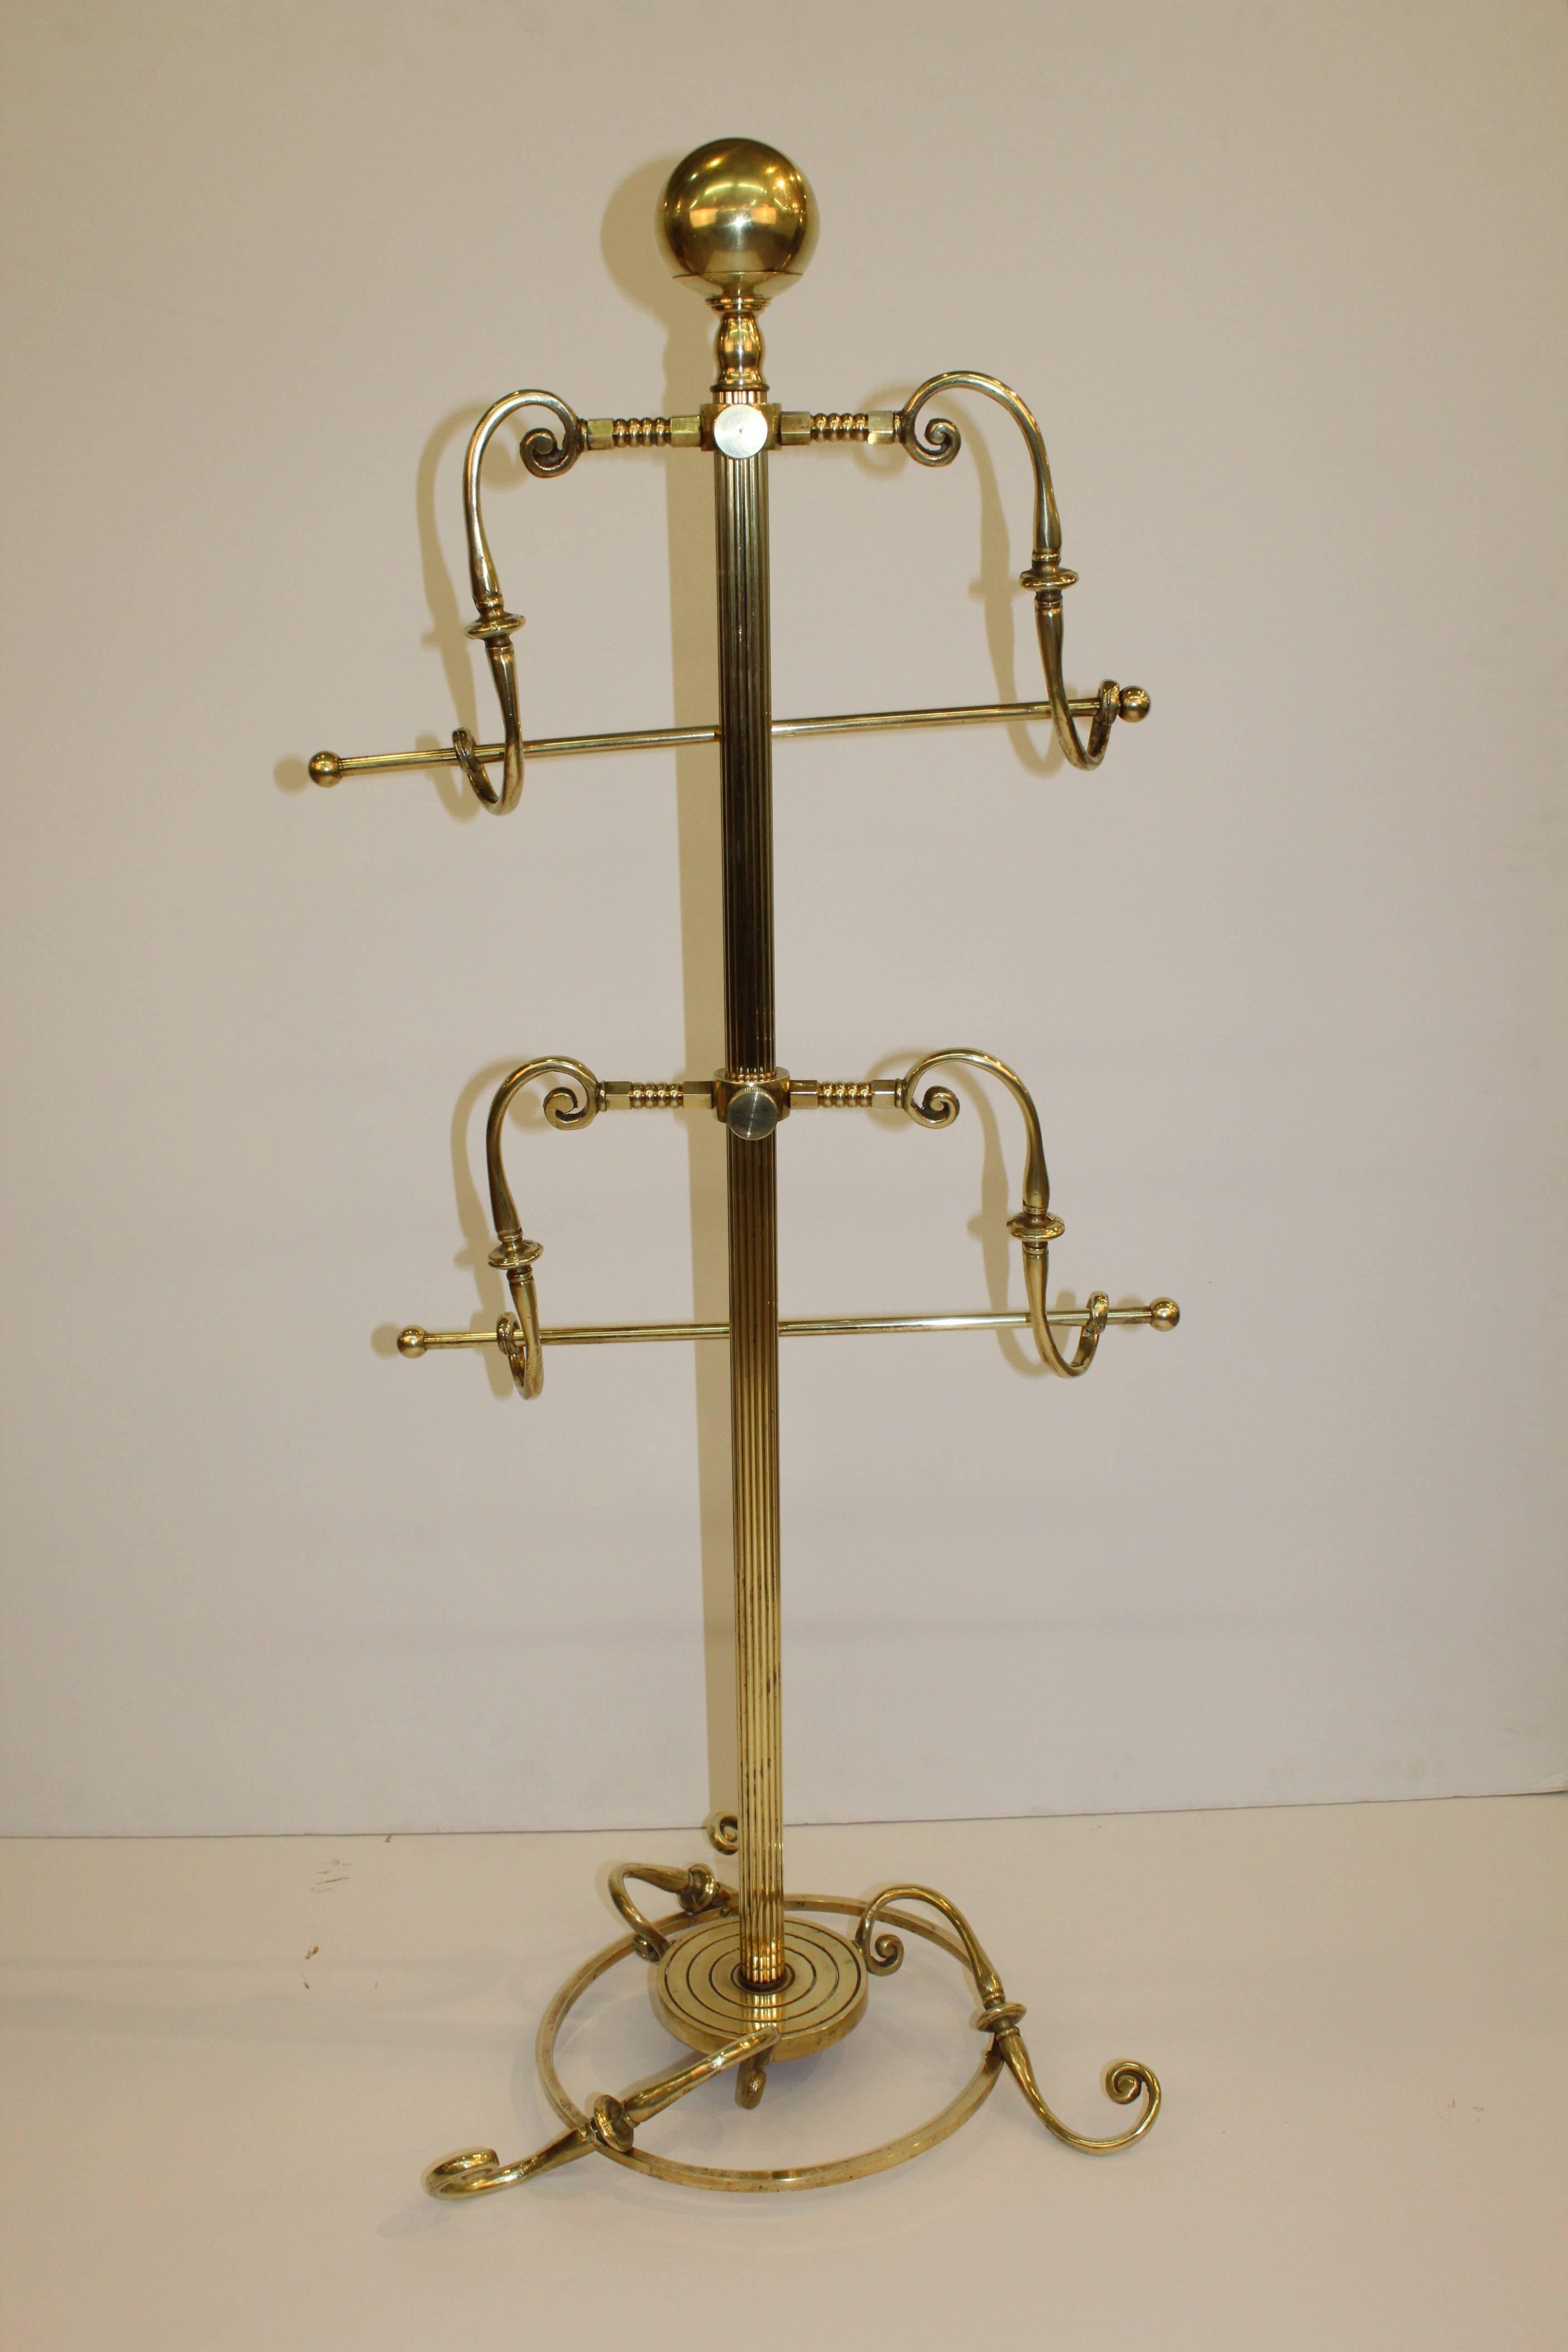 A small brass valet or towel rack produced during the mid-20th century in Italy. Recently polished. In very good condition consistent with age and use.

110081